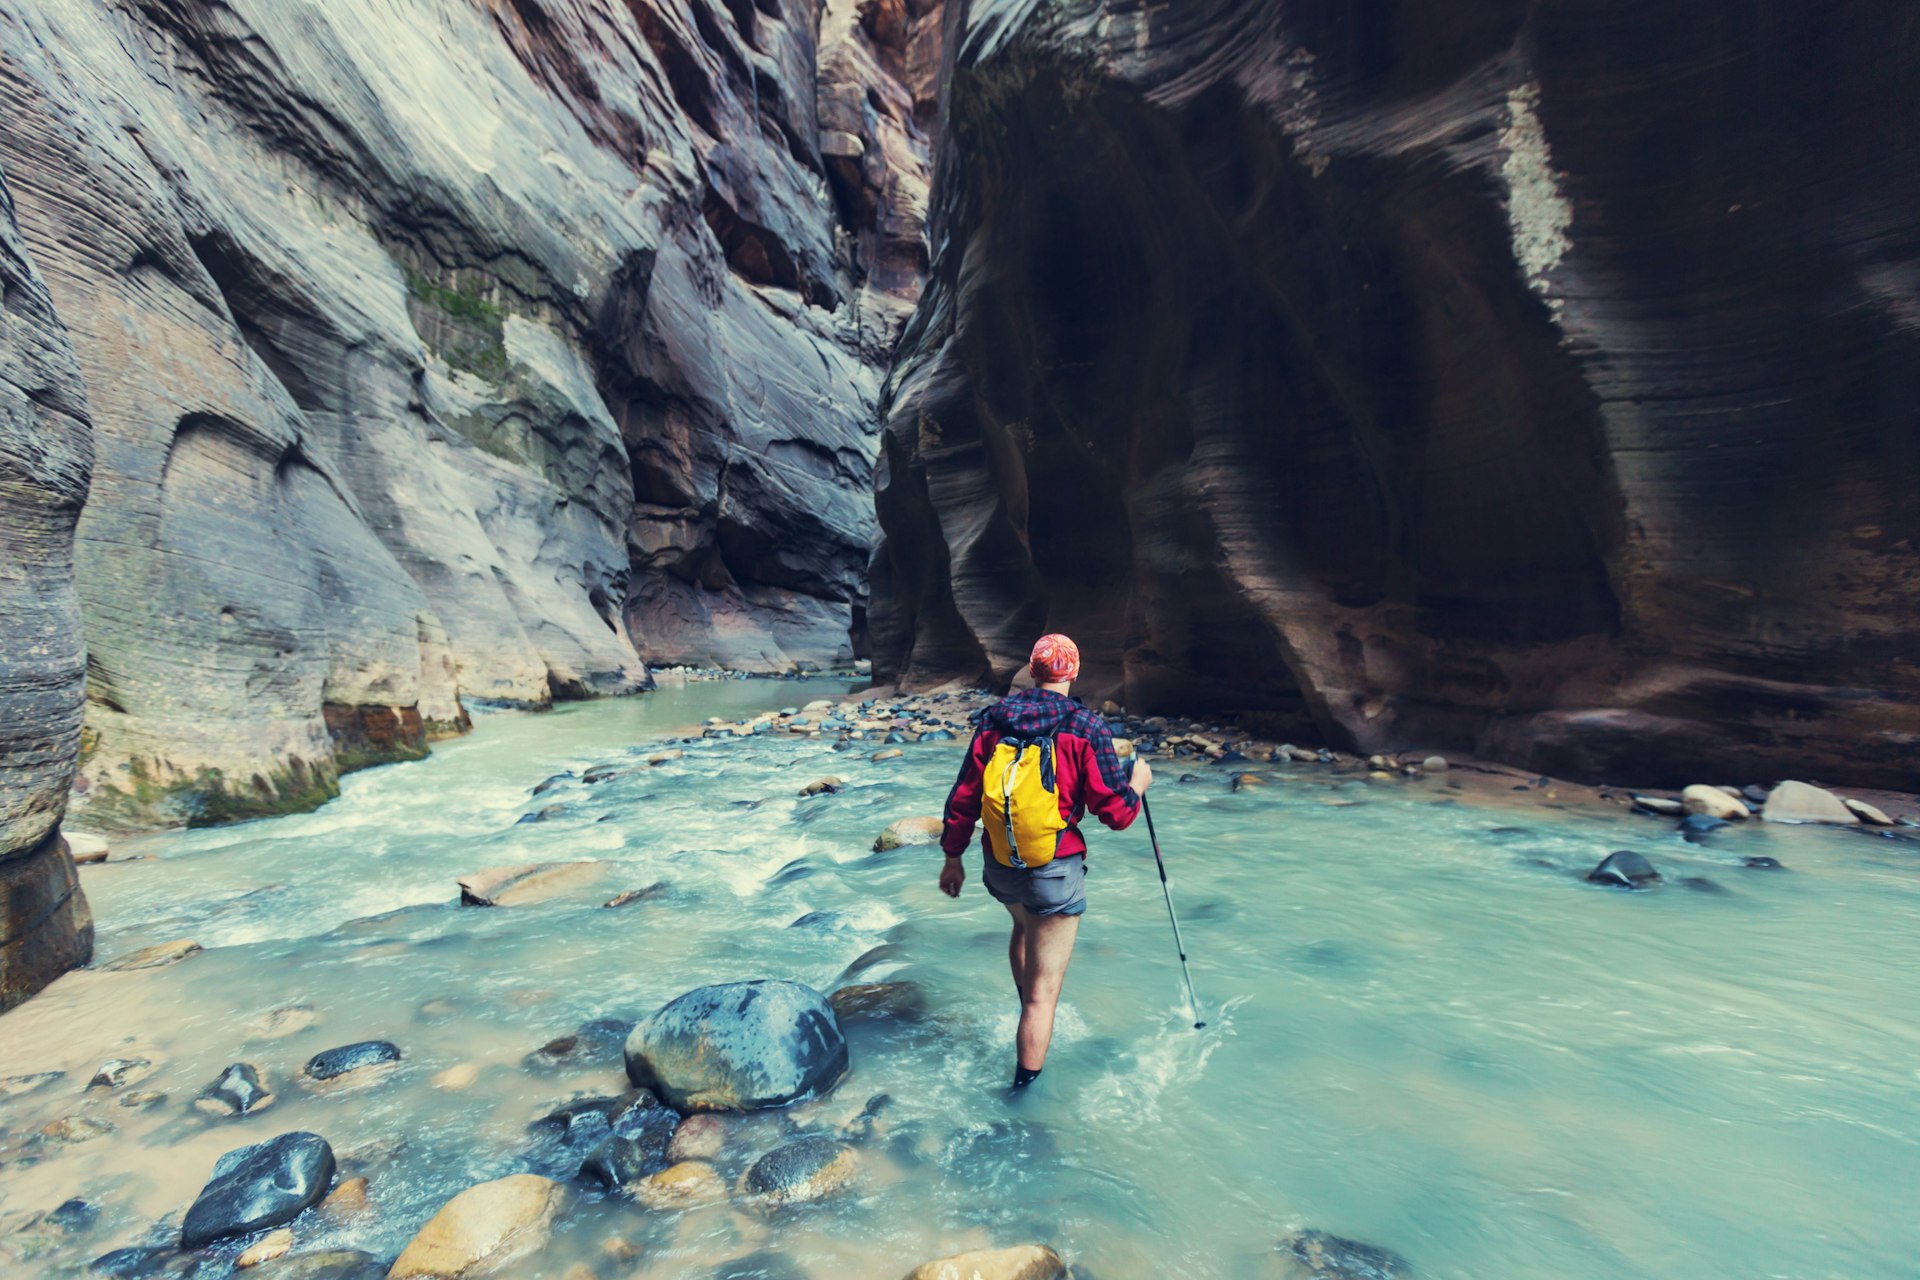 A hiker wades through water in the Narrows in Zion National Park